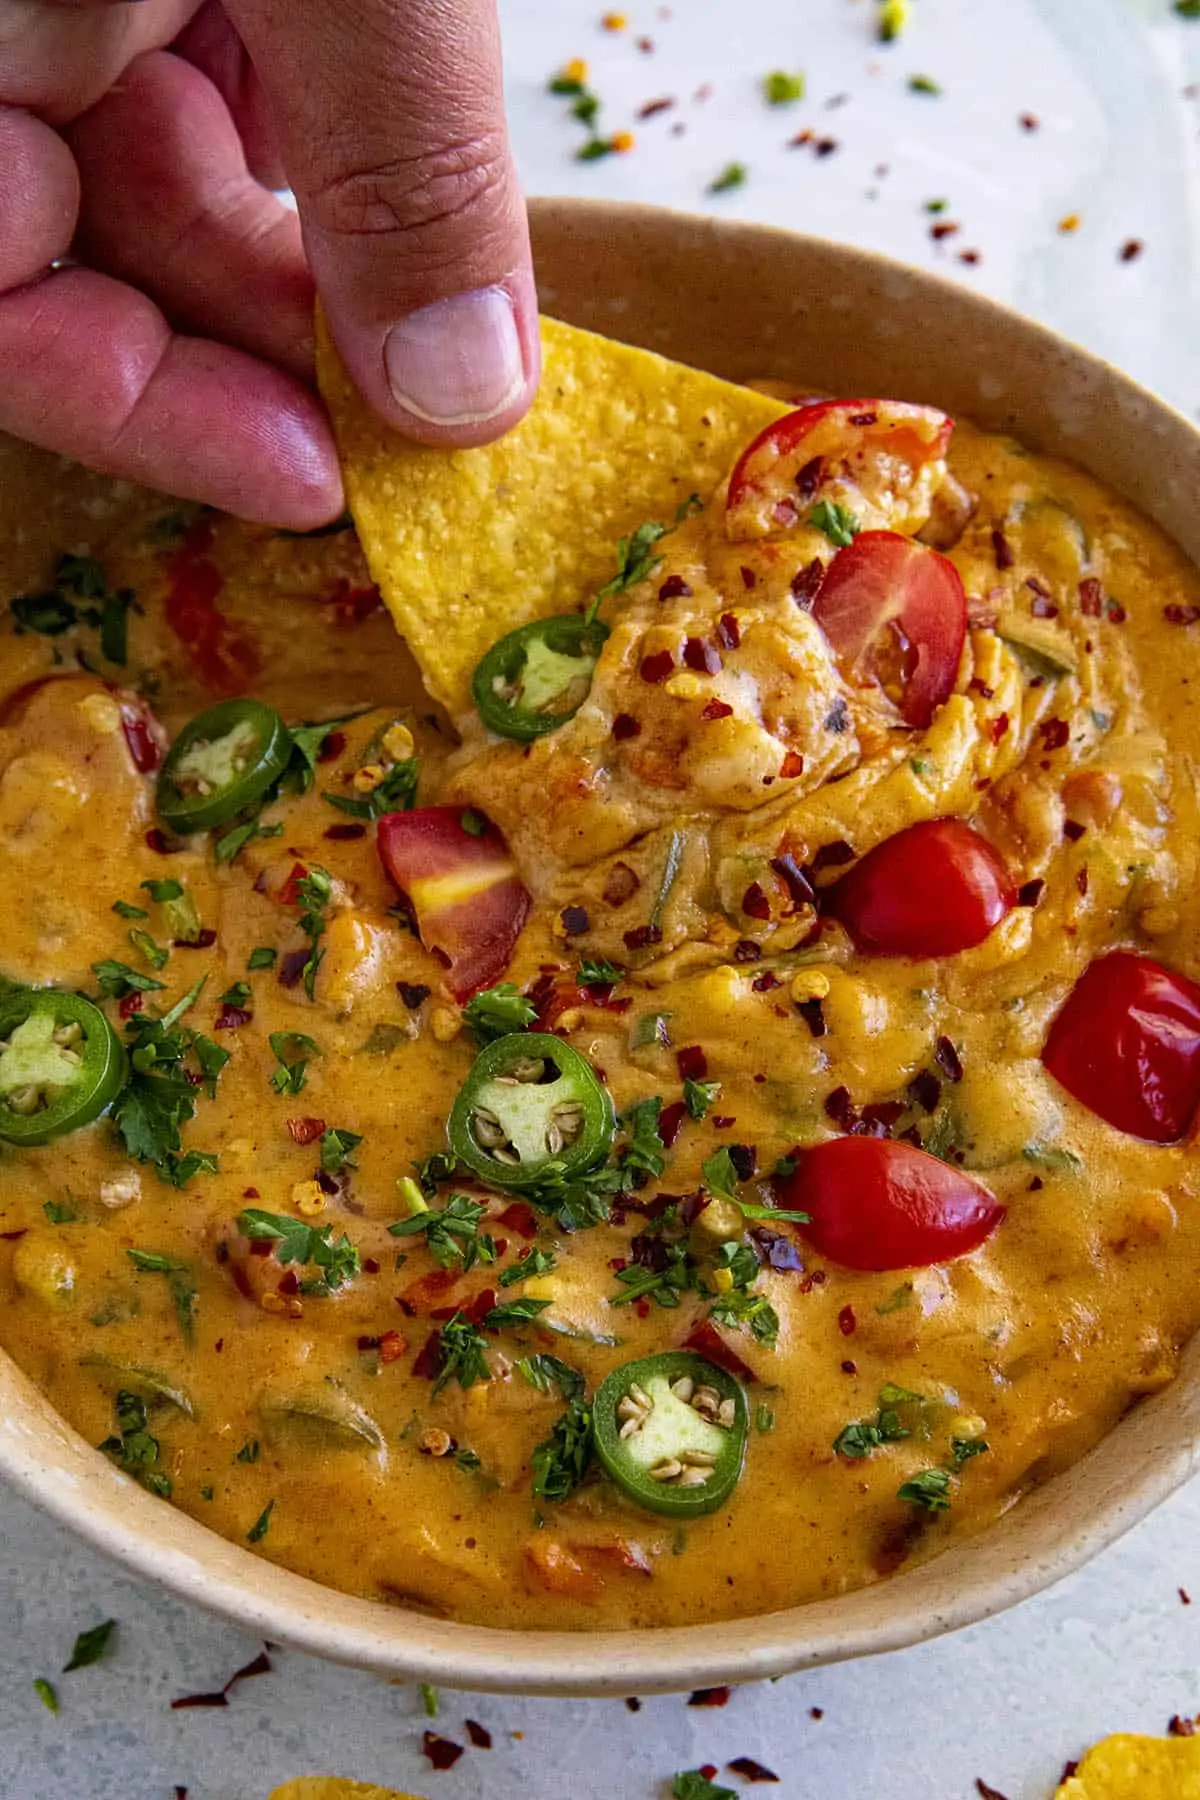 Dipping a chip into a bowl of hot queso dip.